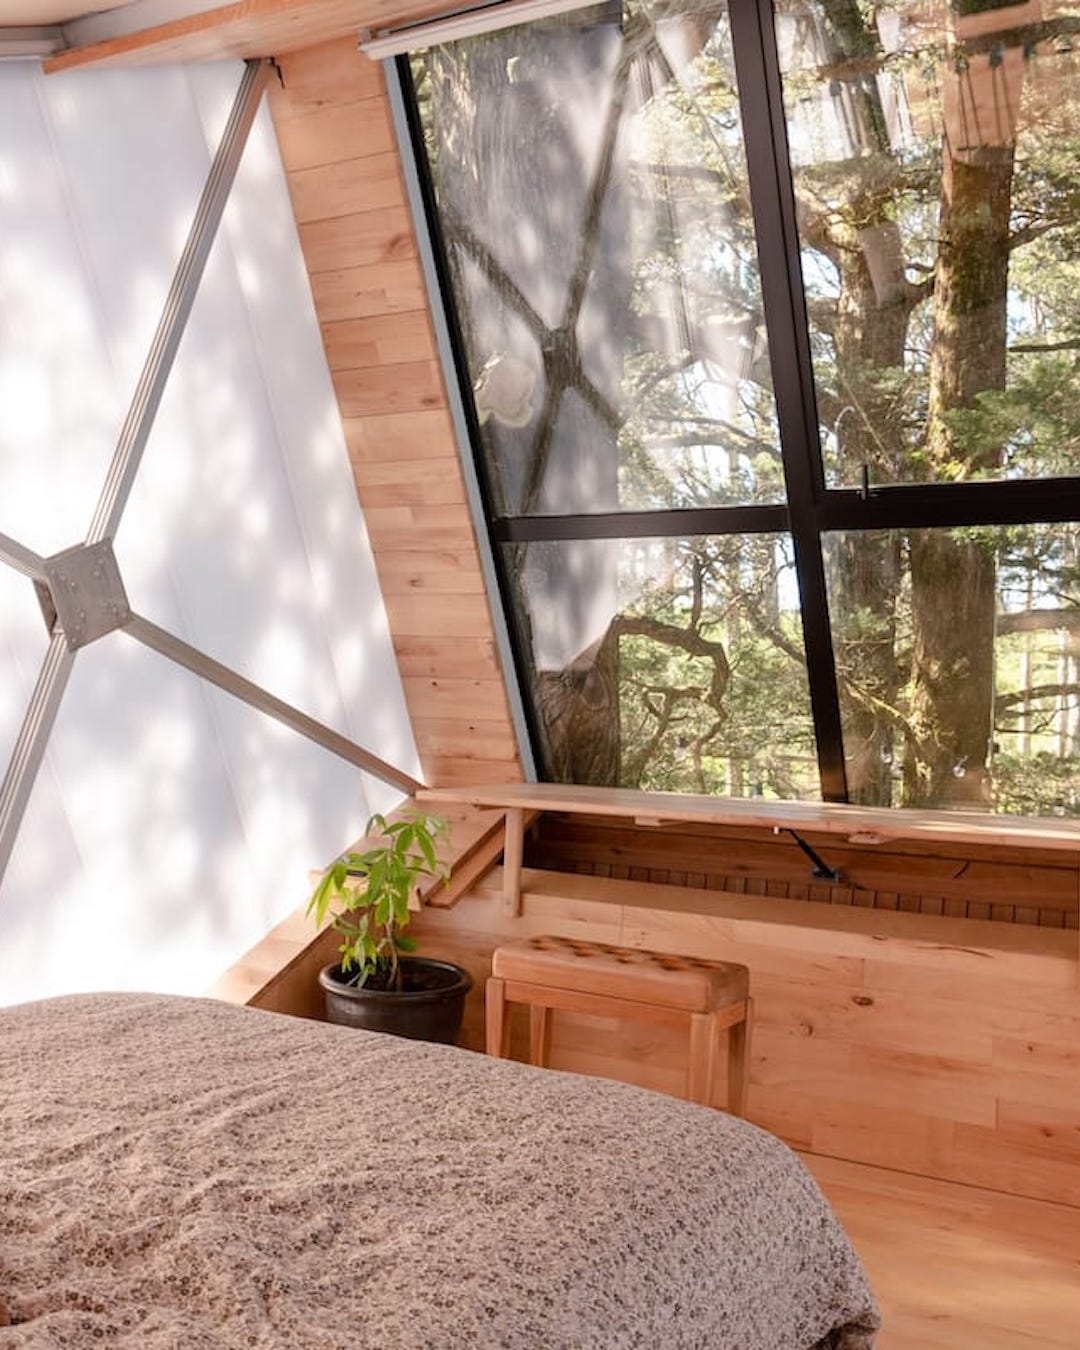 A bedroom in a wood and cloth geodesic dome looking out to trees